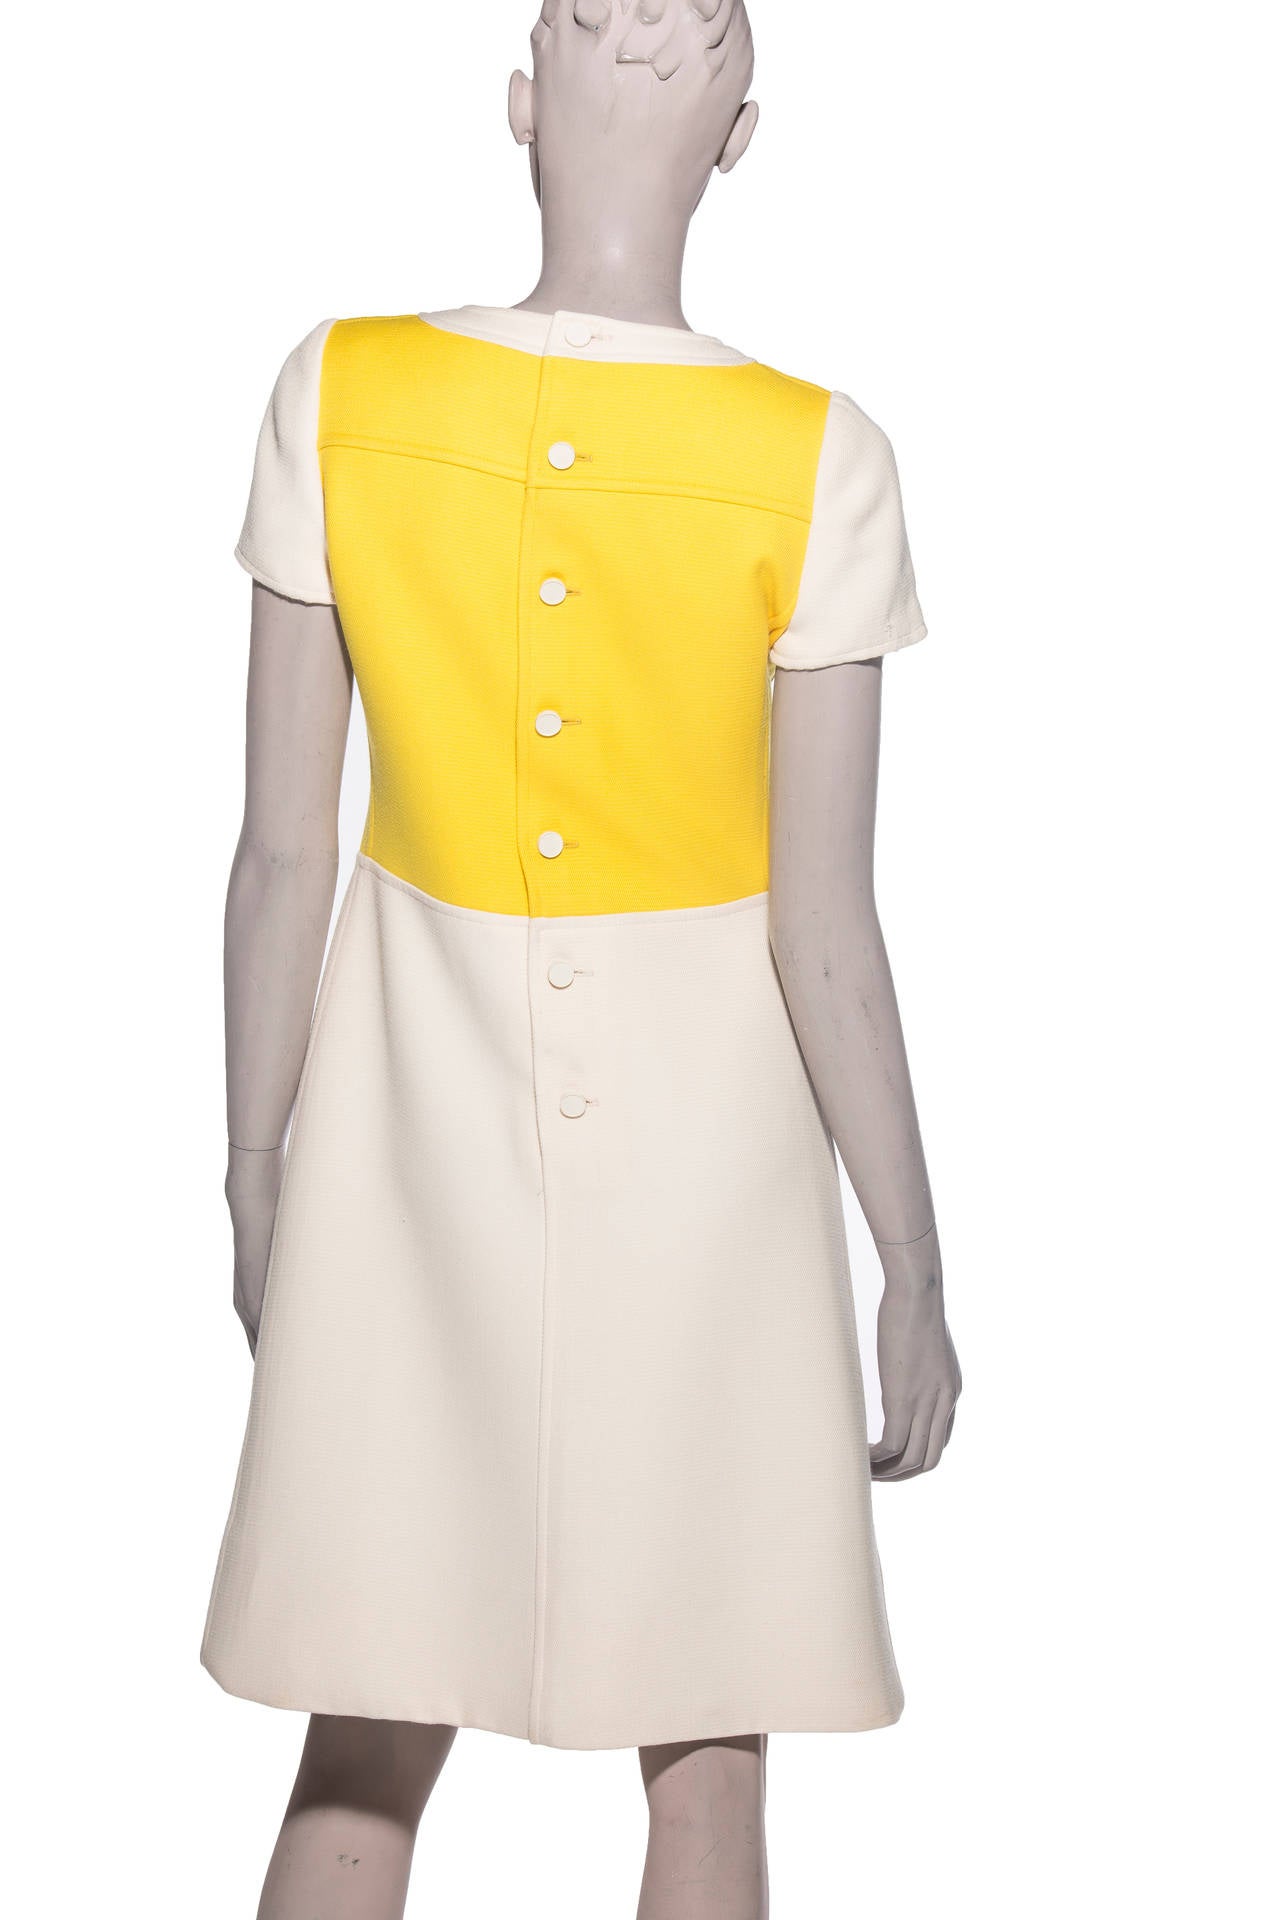 Andre Courreges A-Line Dress With Cap Sleeves, Circa 1960's For Sale at ...